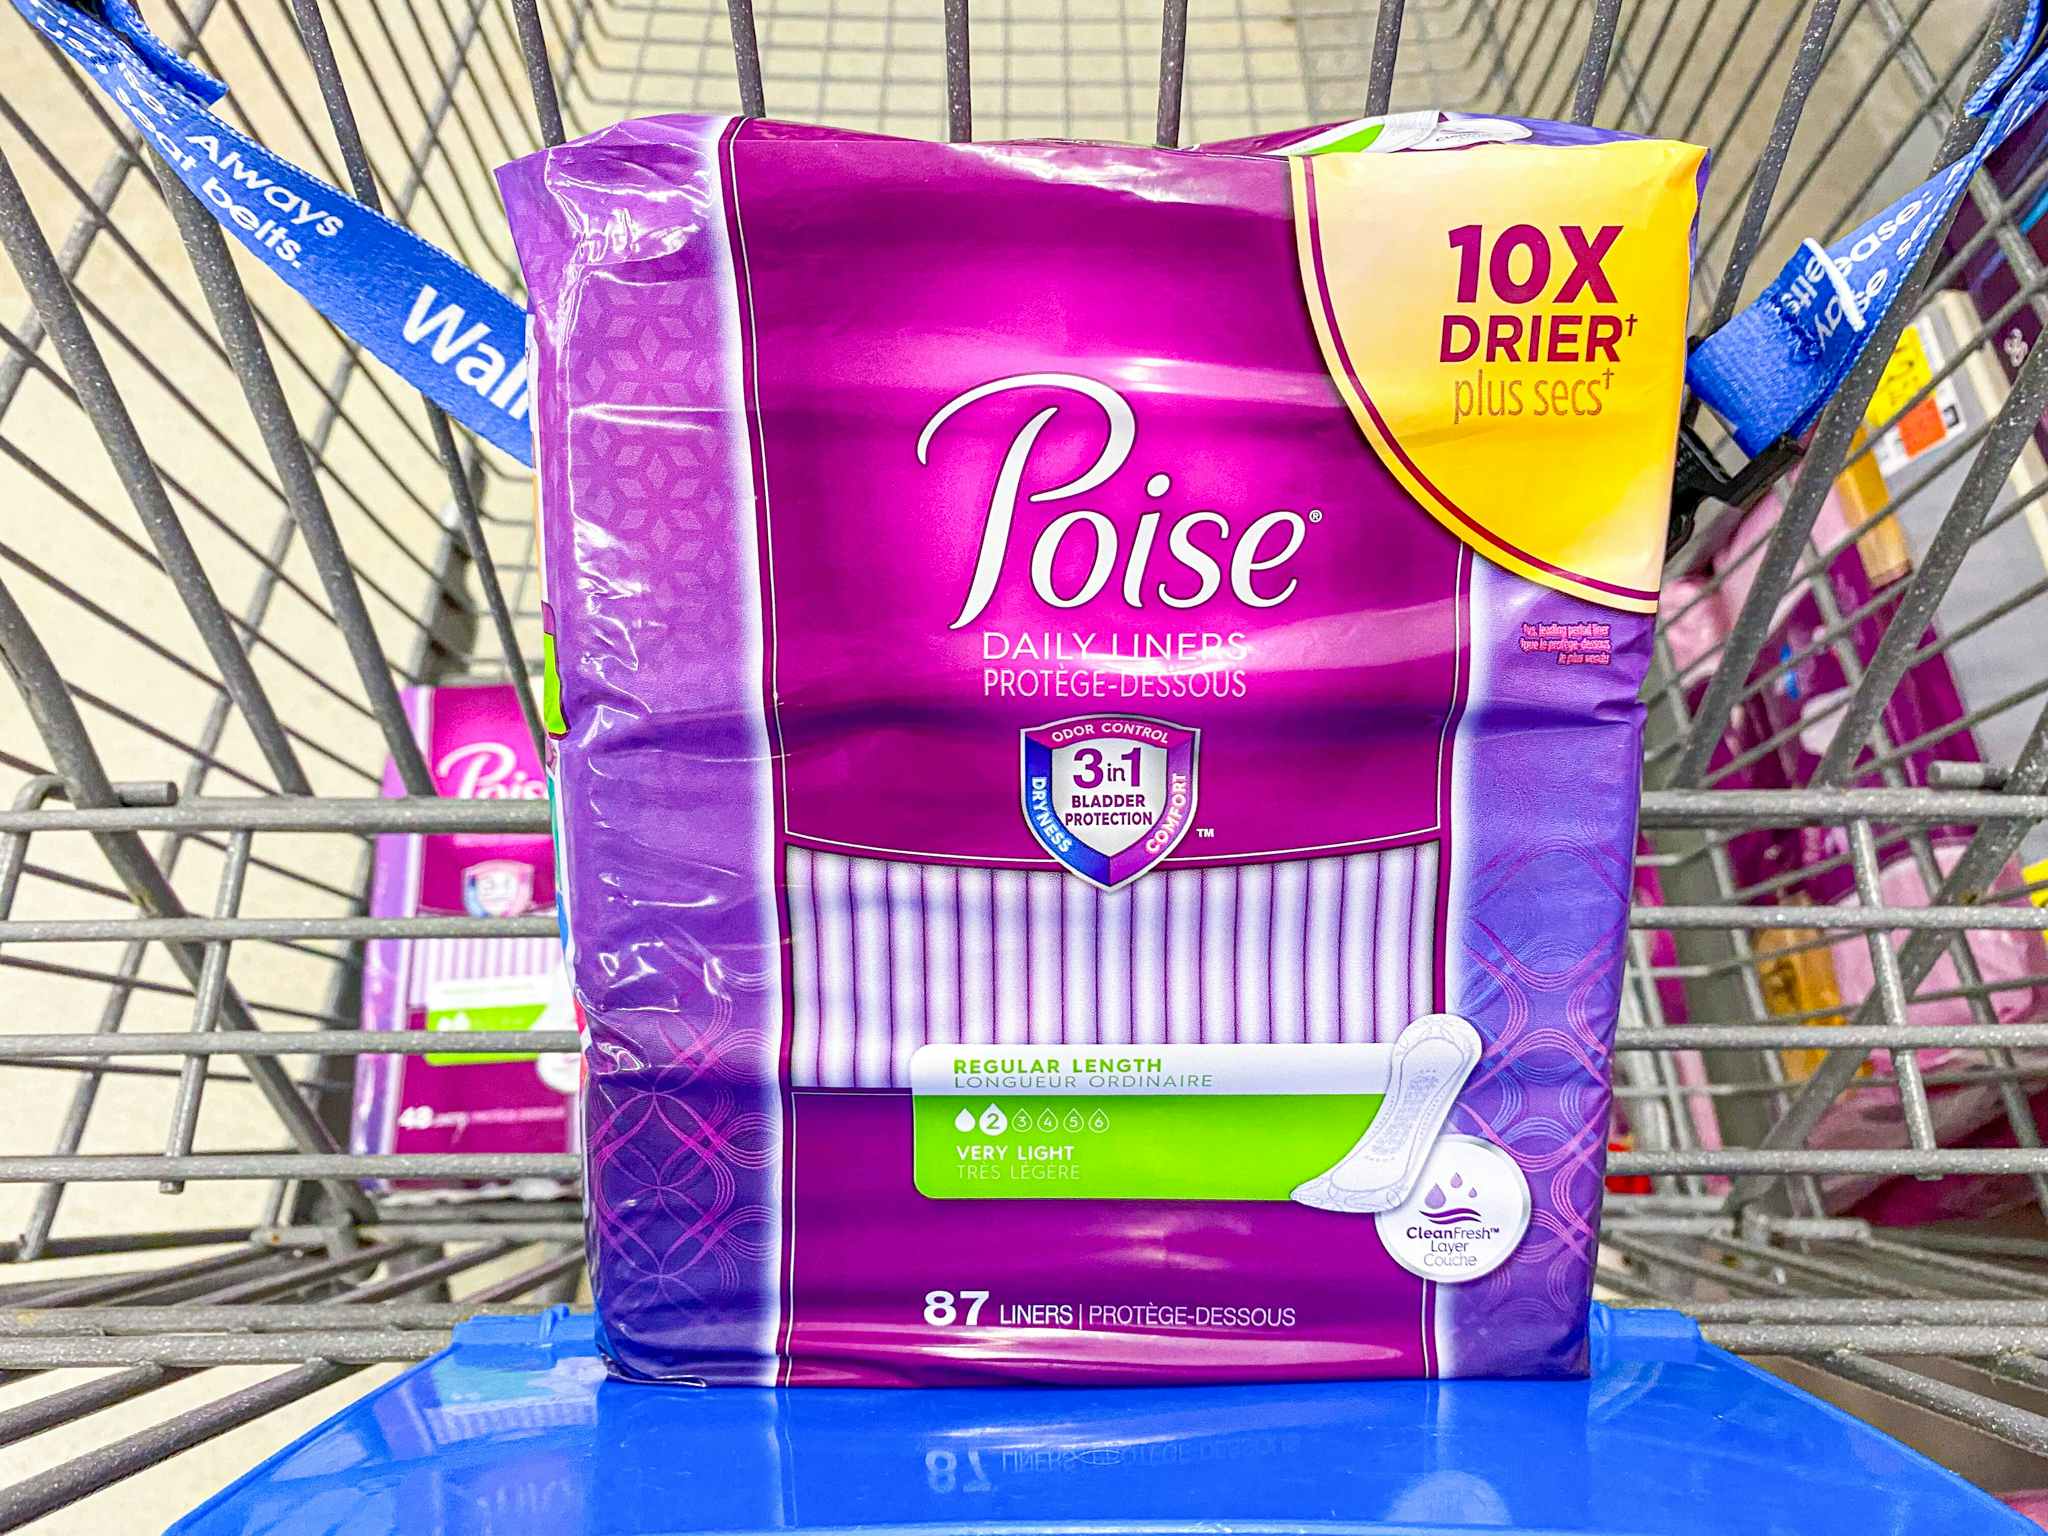 Poise Daily Liners 87-count package in Walmart shopping cart